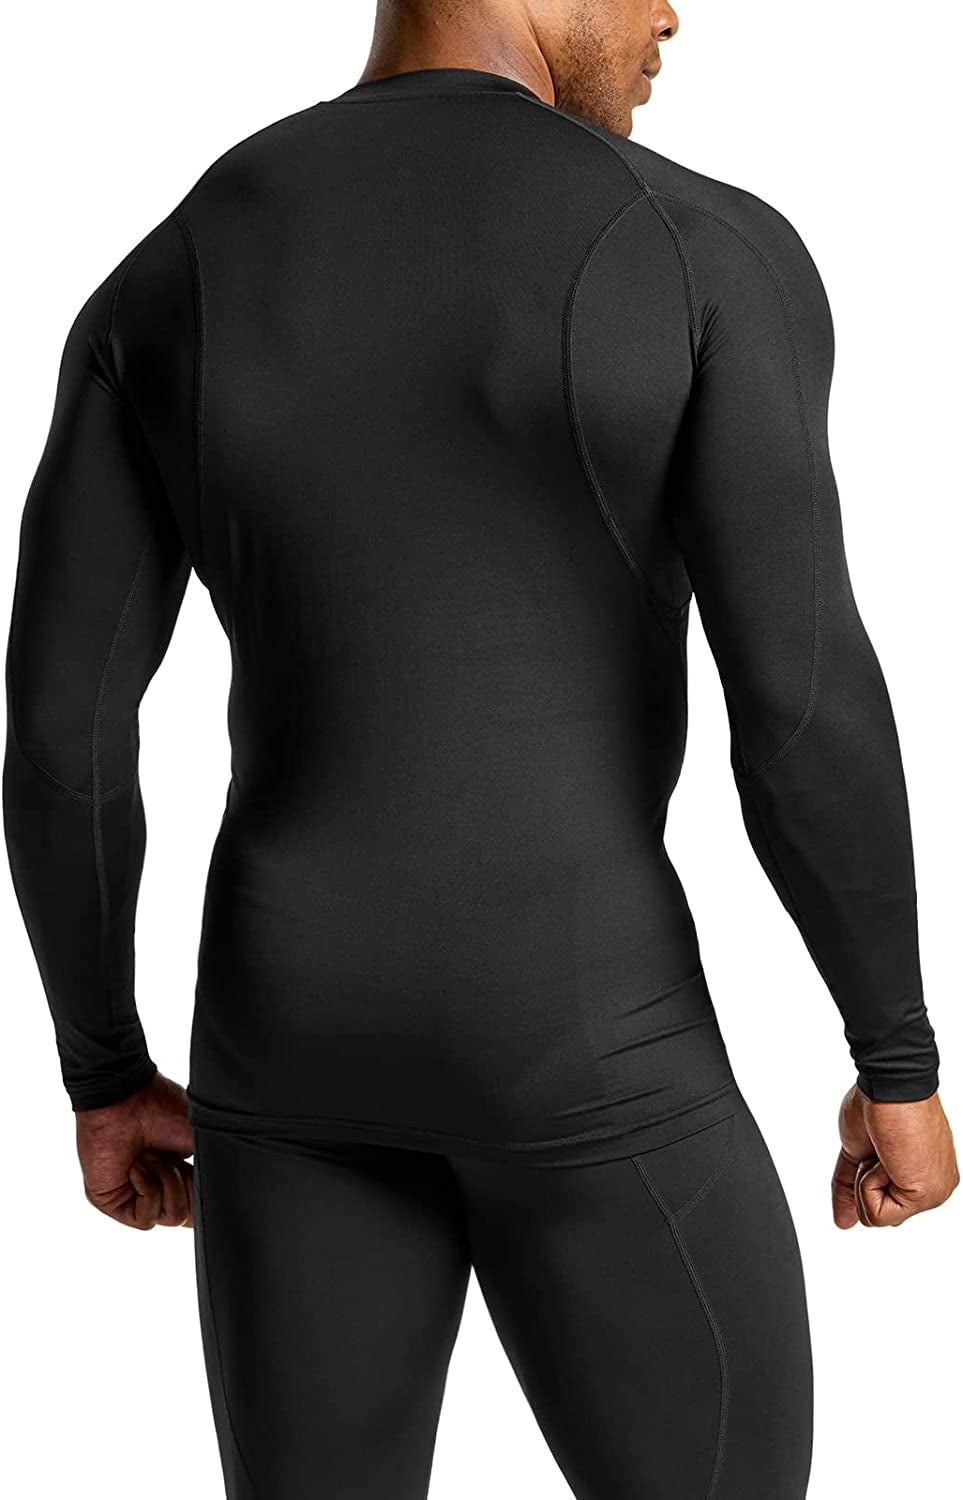 1 or 3 Pack Men'S UPF 50+ Long Sleeve Compression Shirts, Athletic Workout Shirt, Water Sports Rash Guard